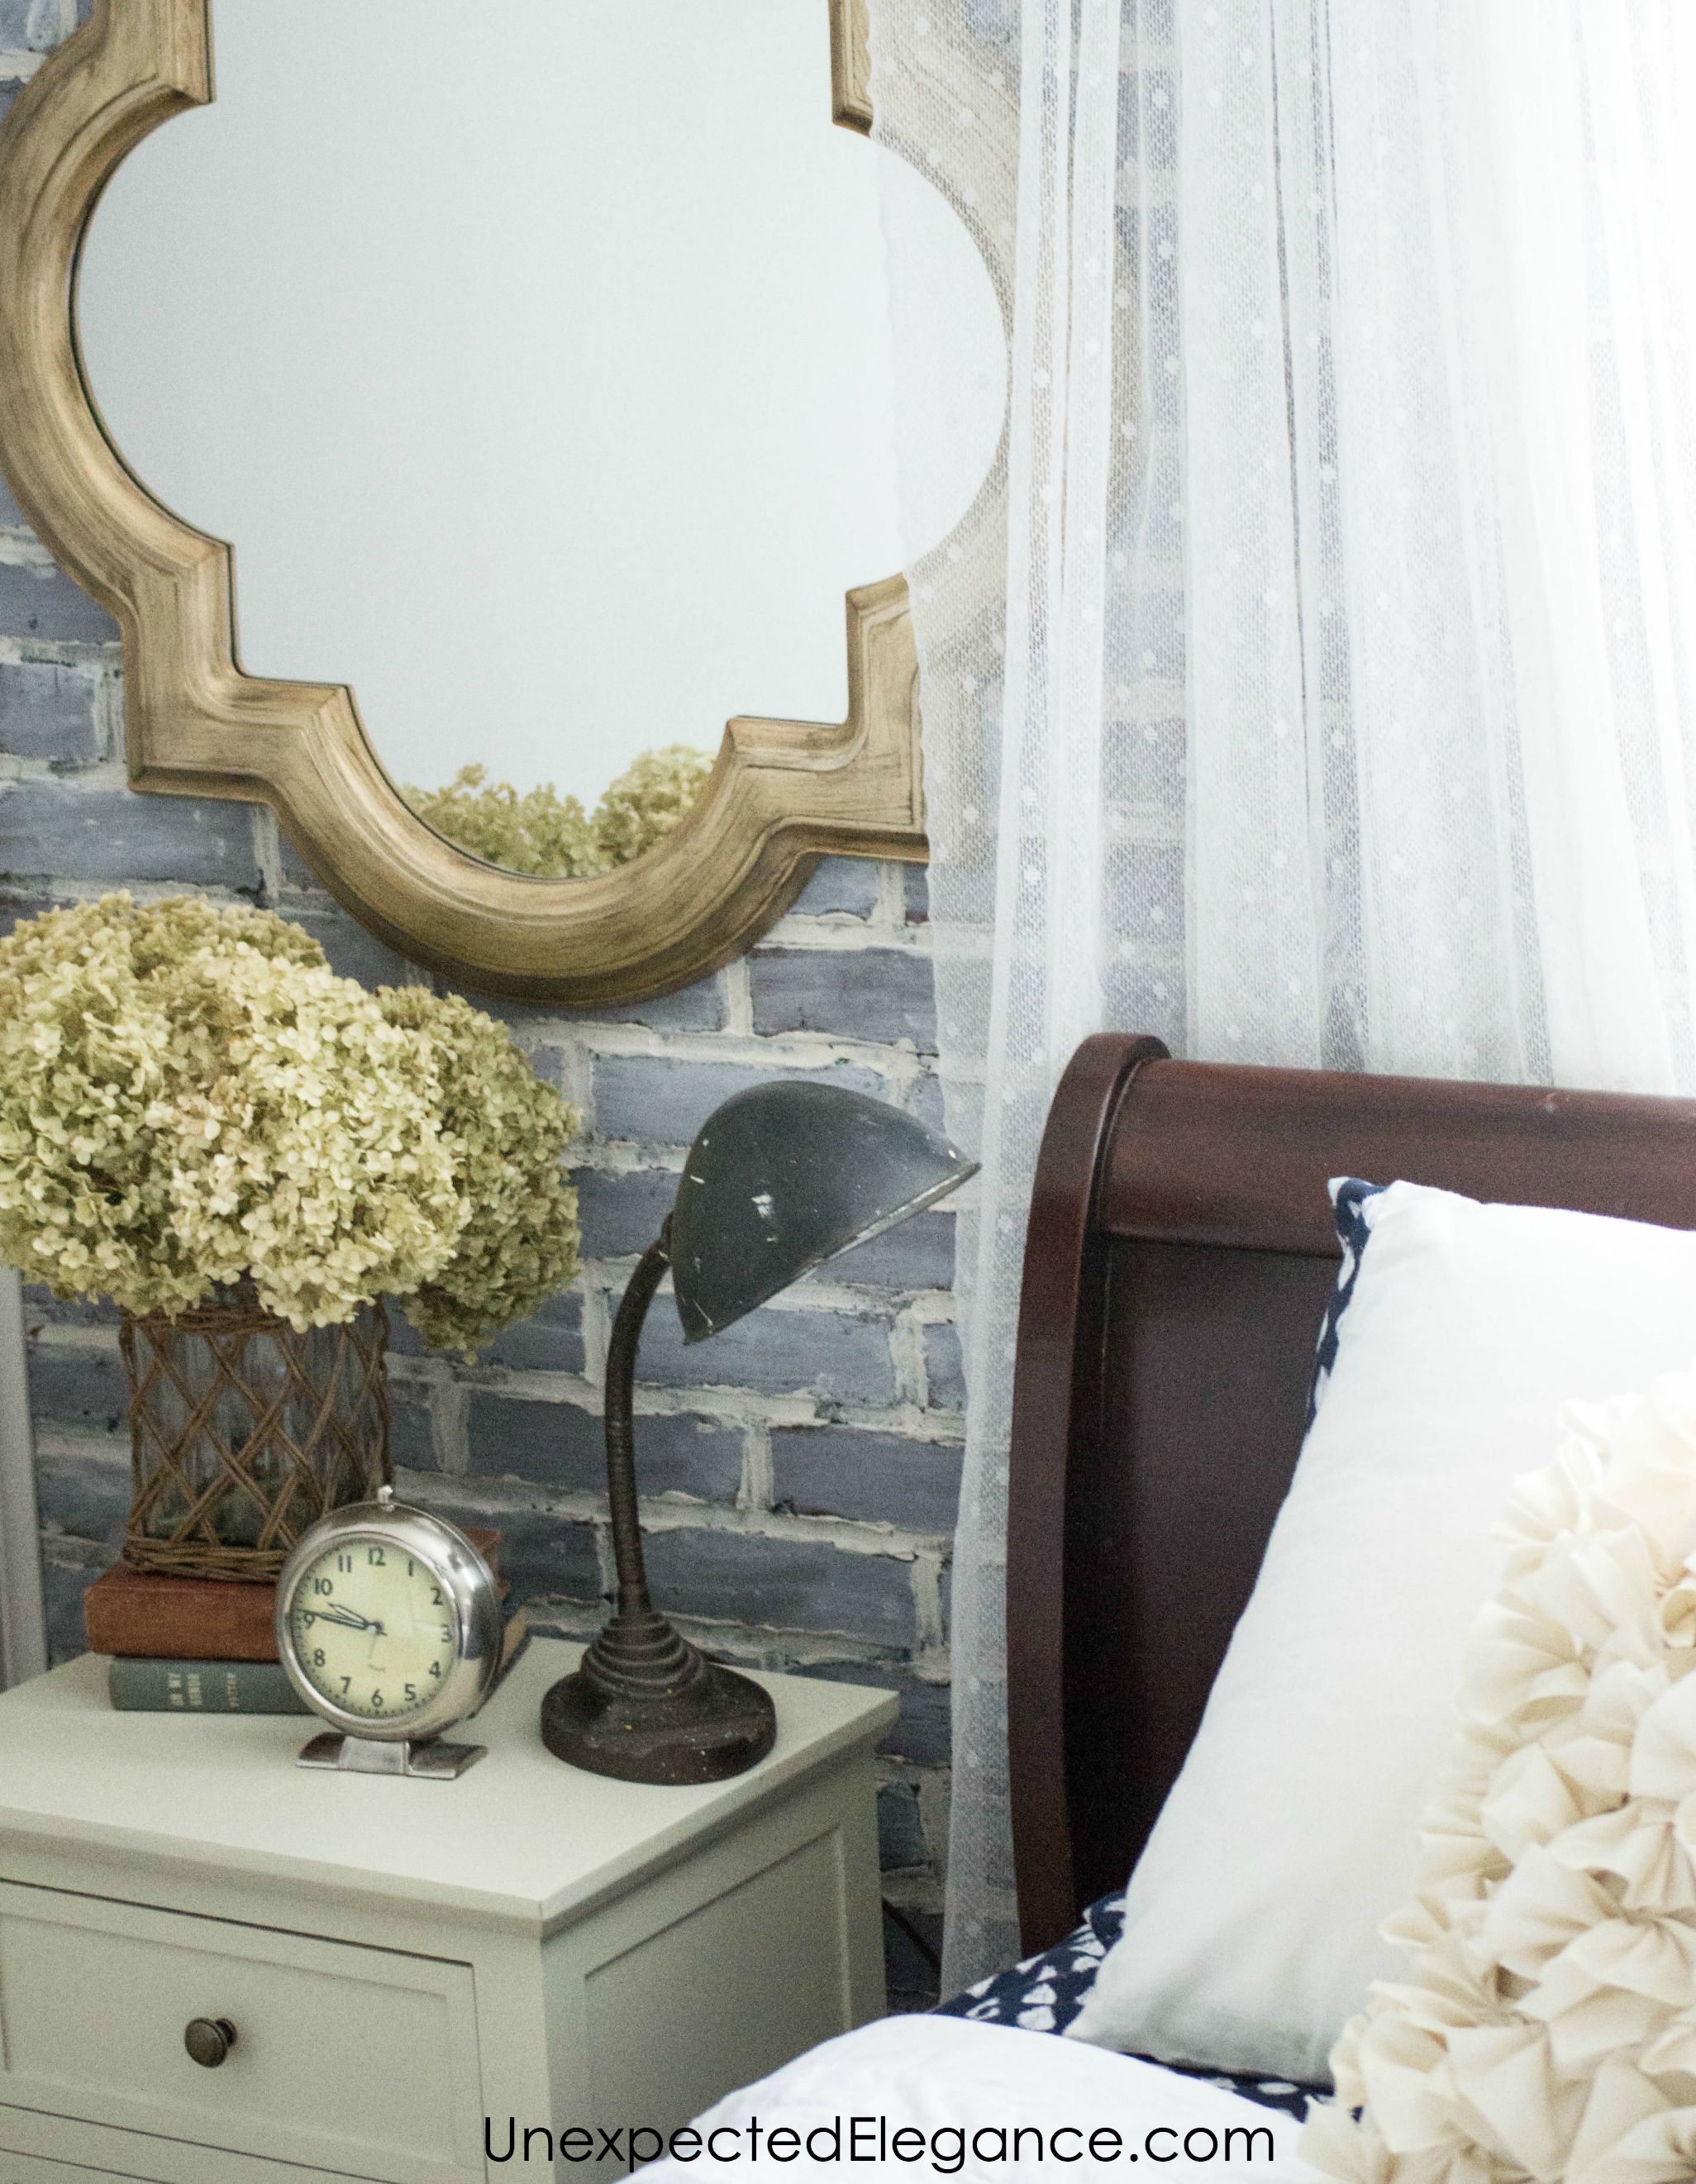 Check out this loft-inspired makeover! A few economical changes to a guest bedroom completely changed the feel.